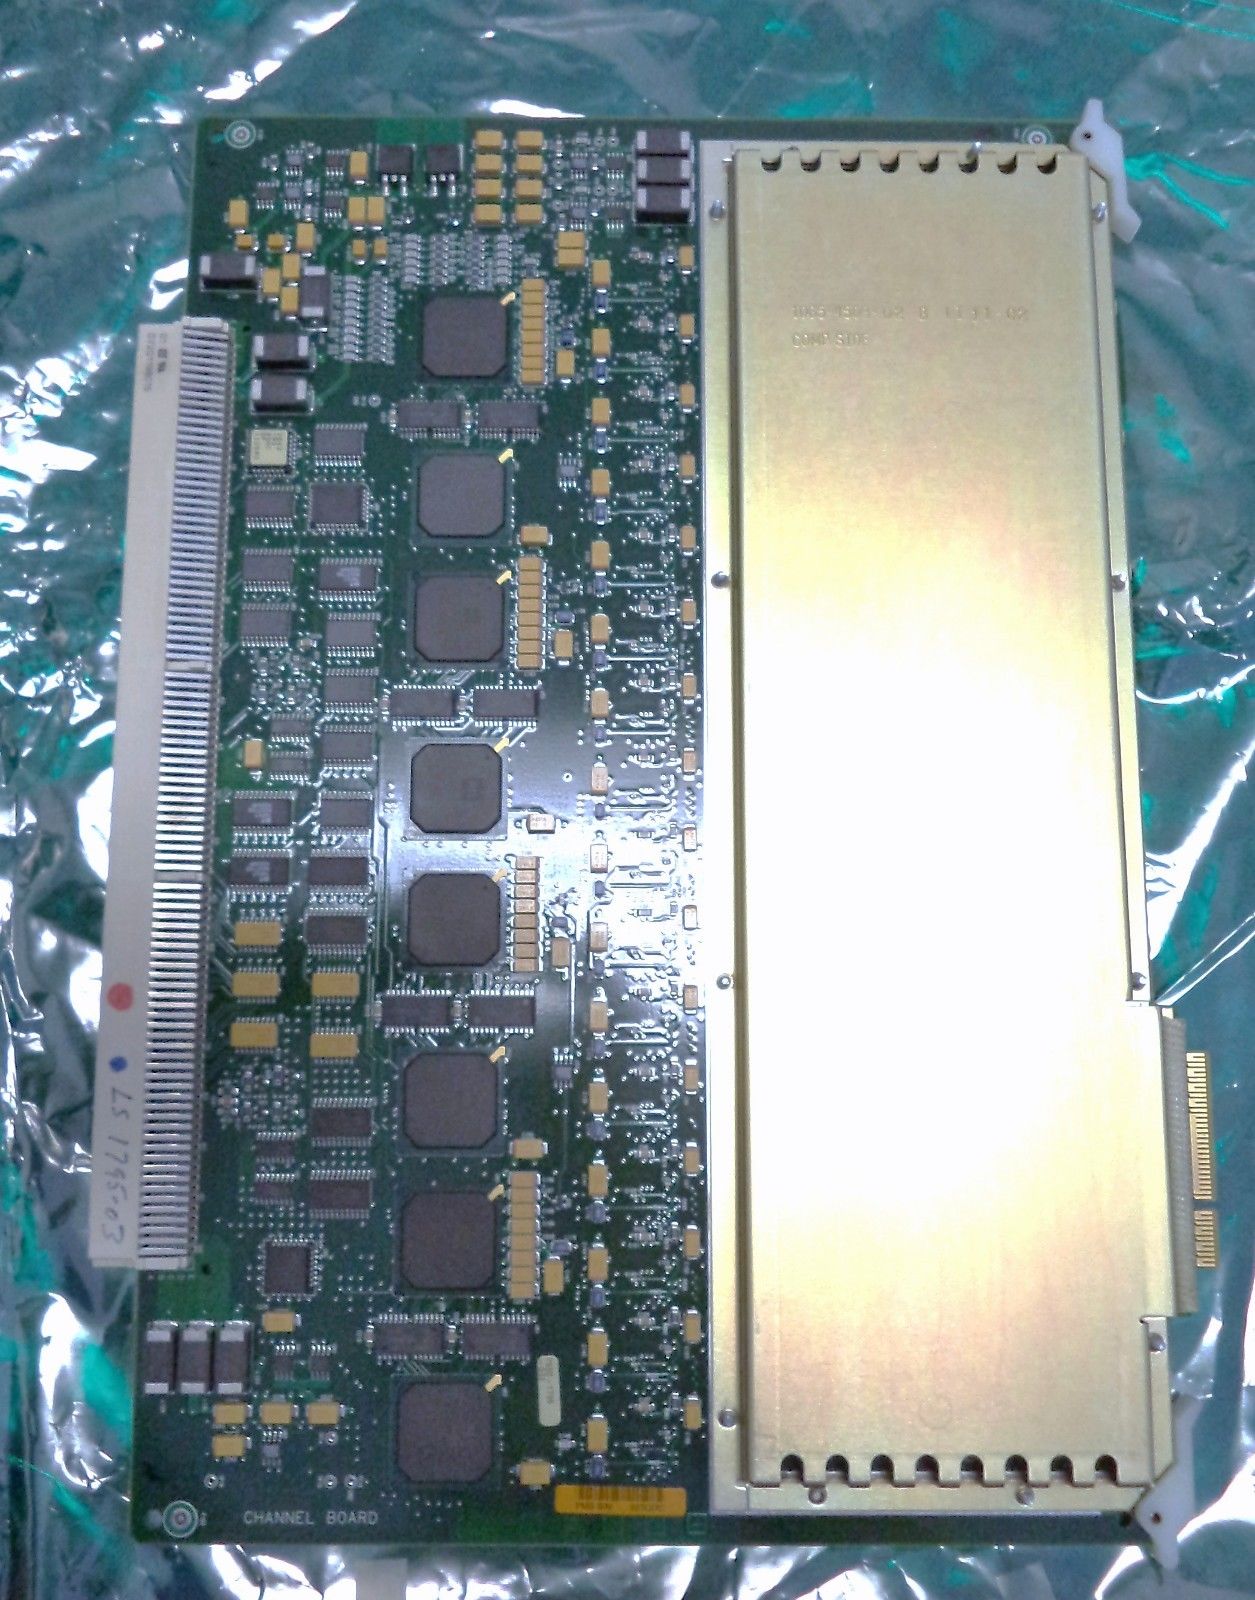 a close up of a computer board on a plastic bag